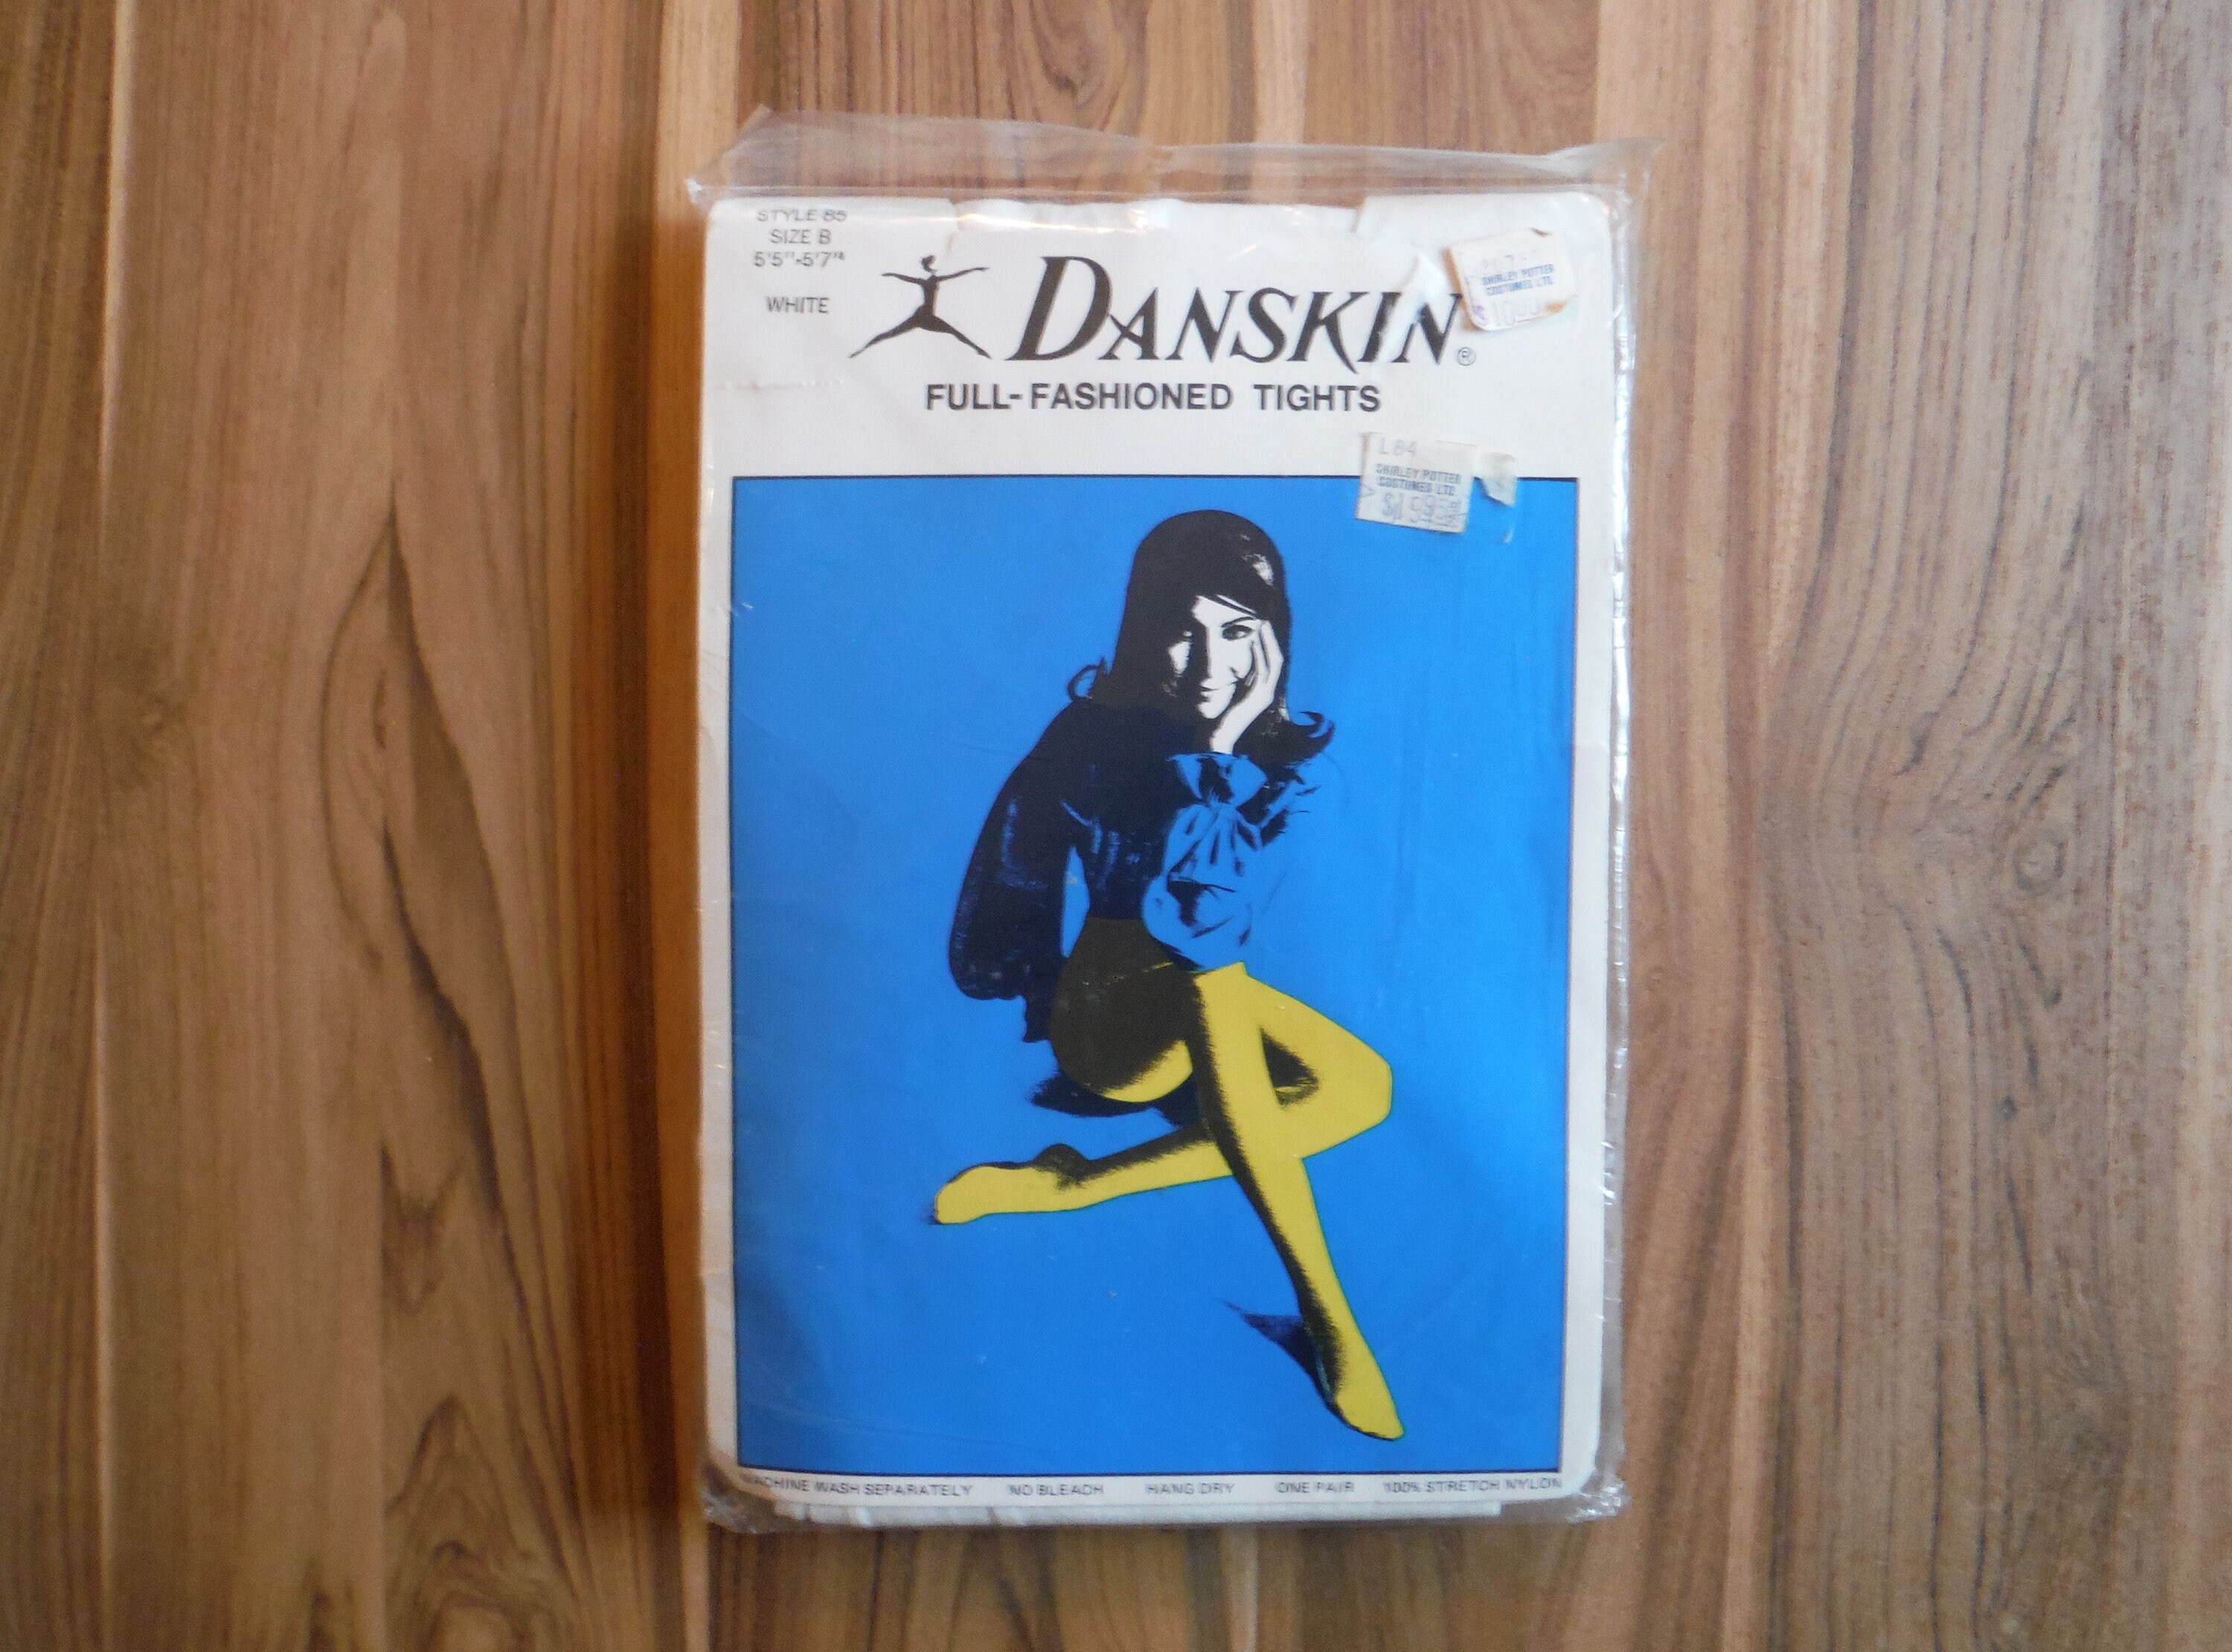 Vintage Ladies White Tights New in Package 1980's Full-fashioned Danskin  White Tights Size B Vintage Danskin Tights Stockings 